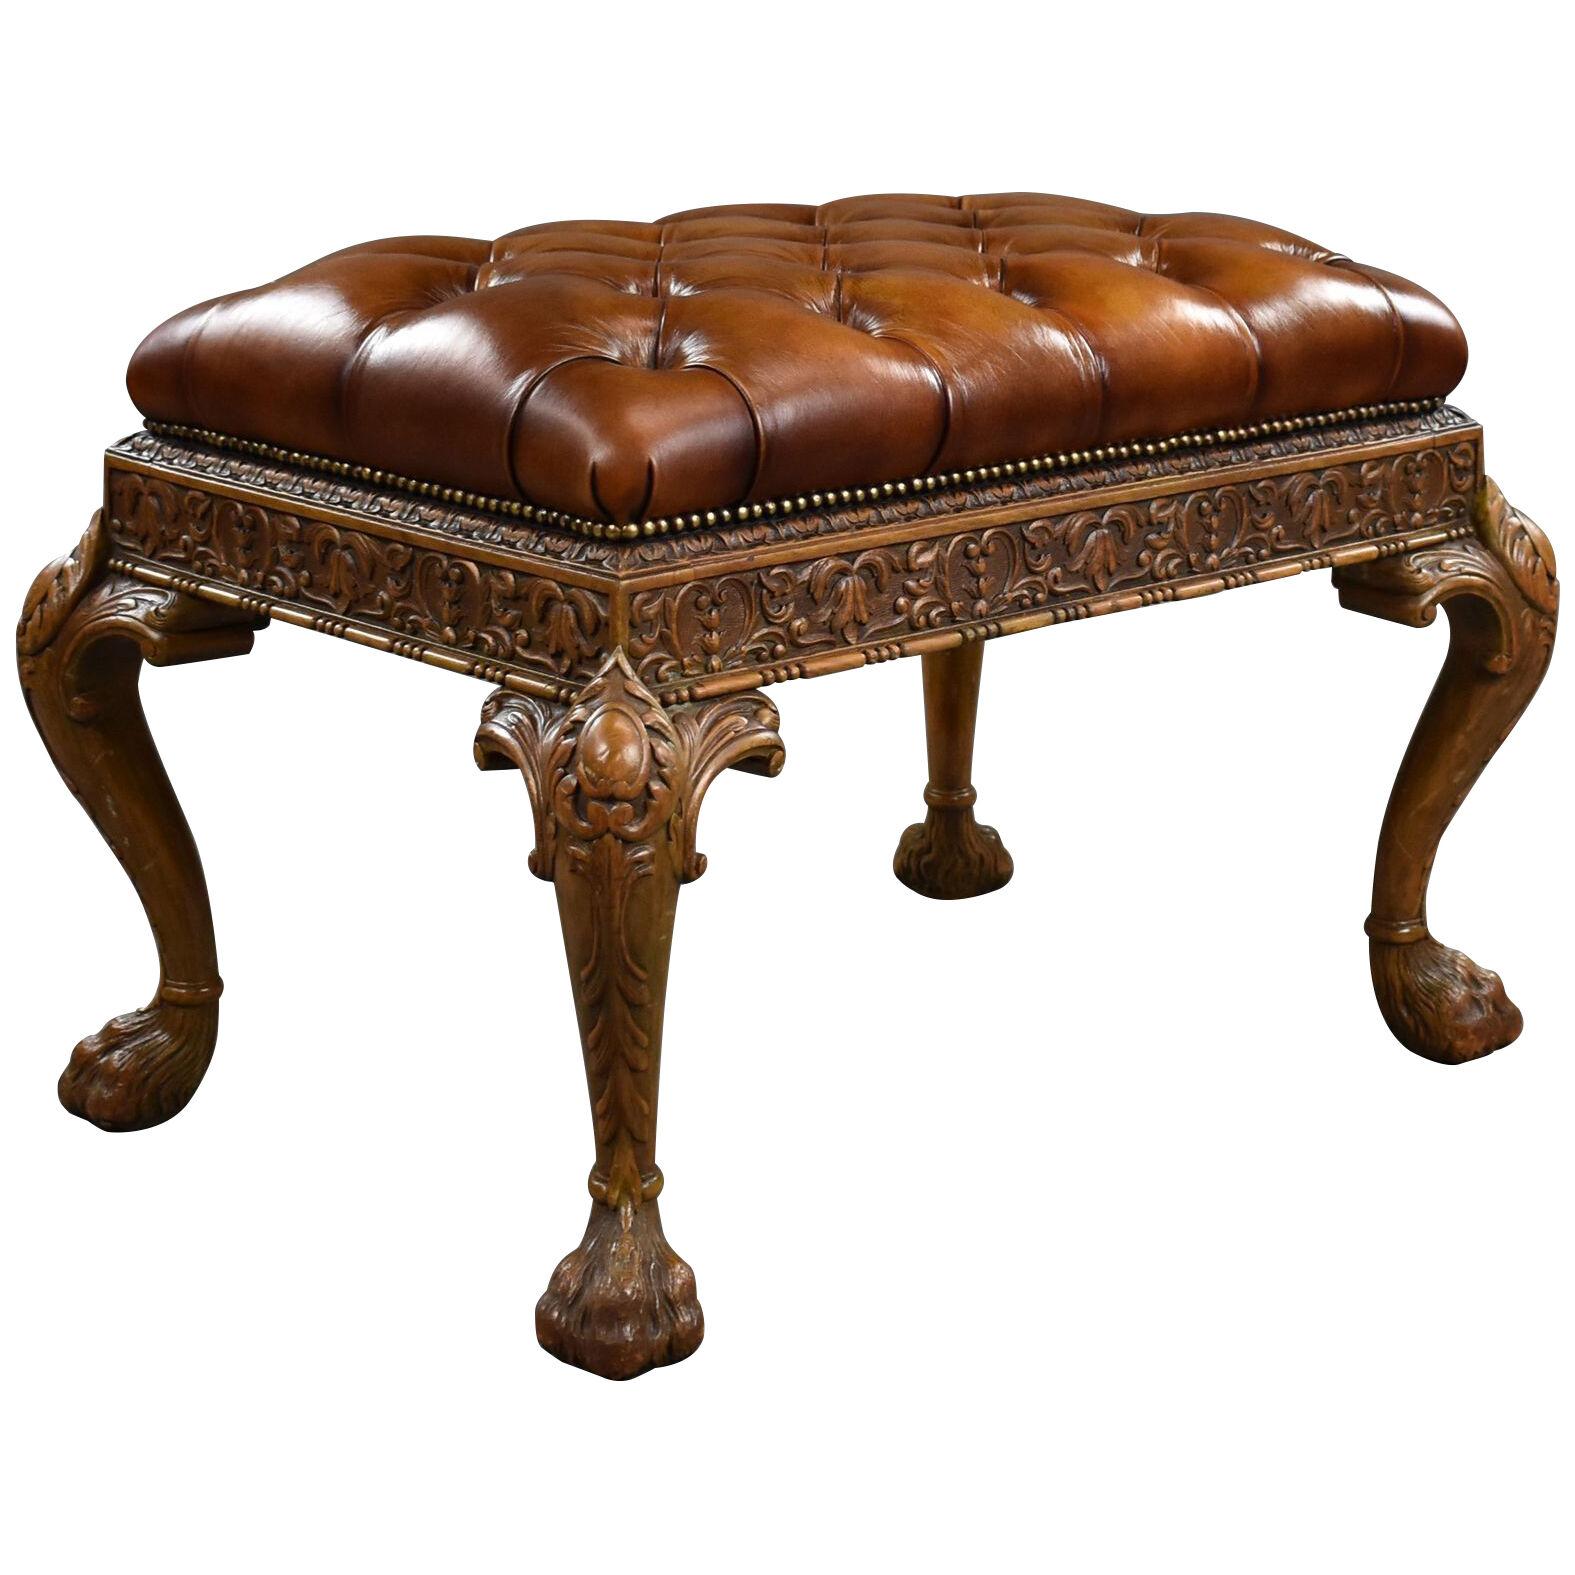 Antique Carved Walnut and Leather Foot Stool by Maple & Co